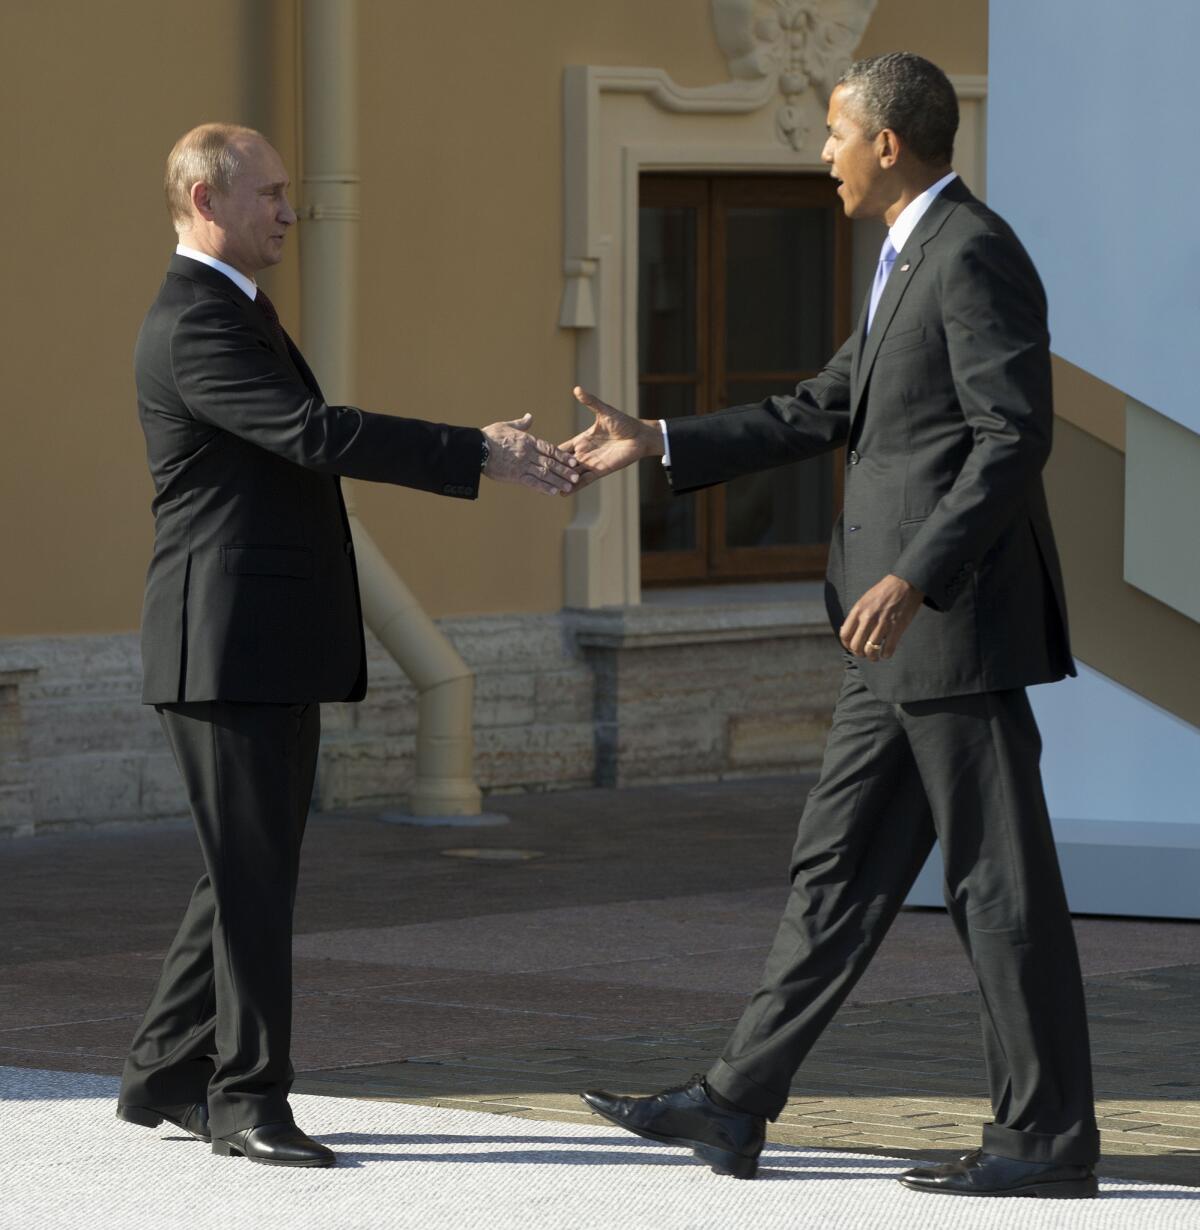 President Obama shakes hands with Russian President Vladimir Putin at the G-20 summit in St. Petersburg, Russia.